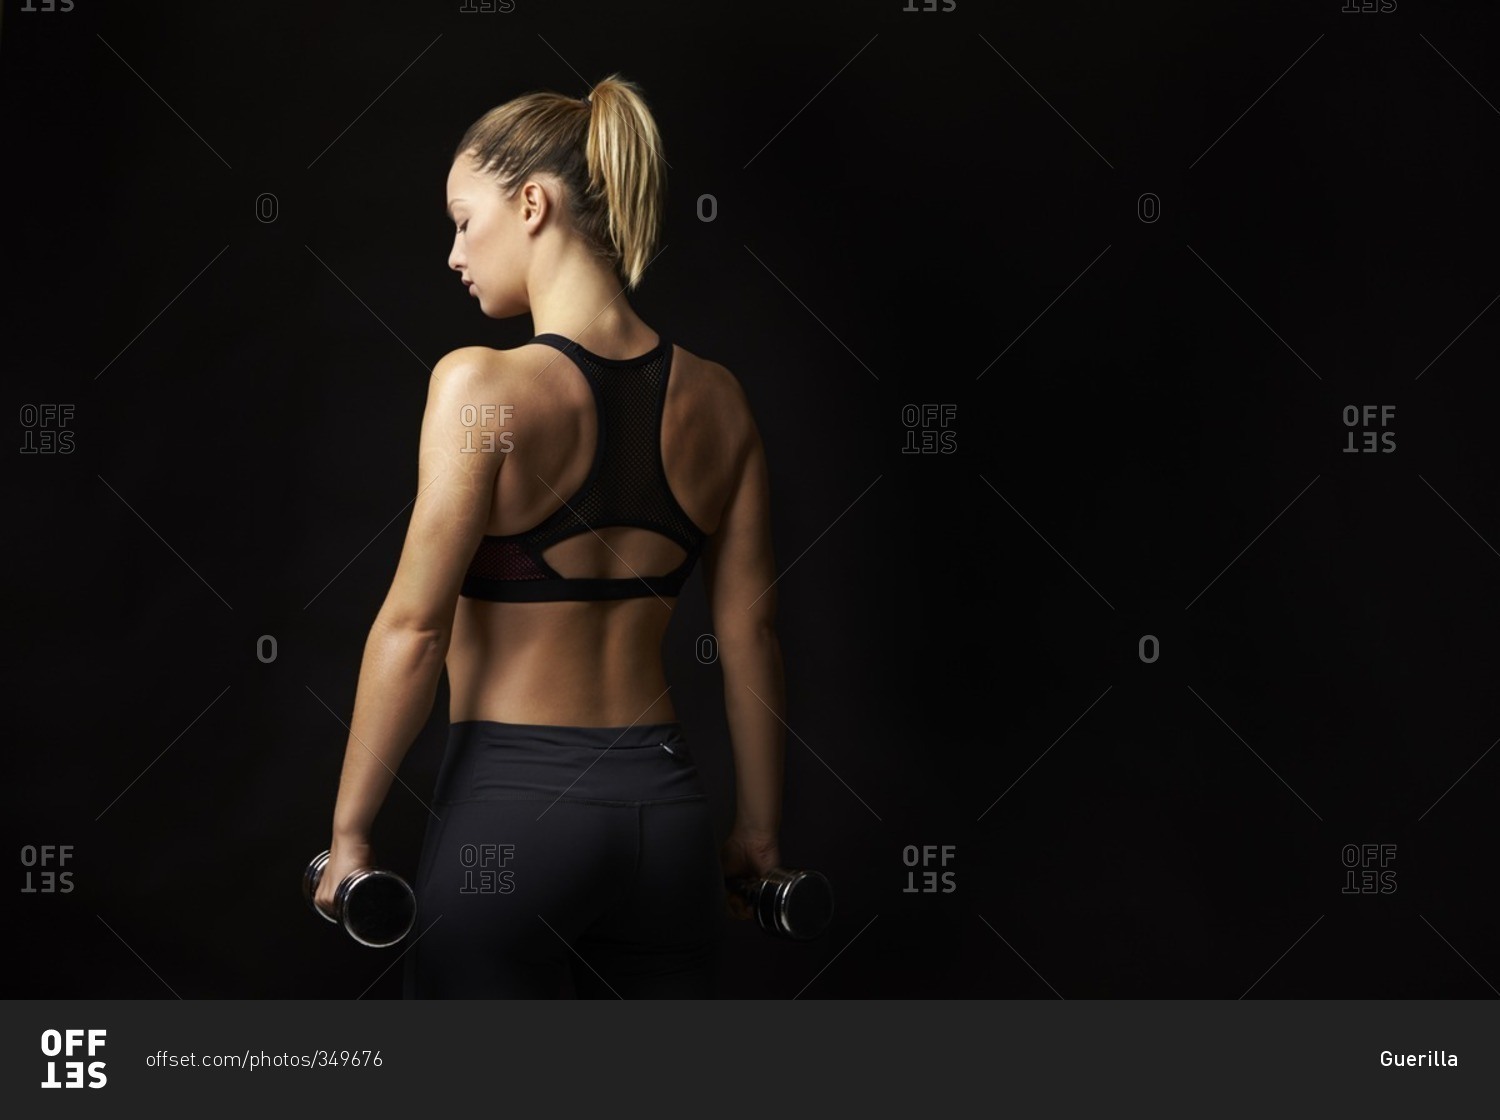 Blonde woman in sports clothing holding dumbbells, back view